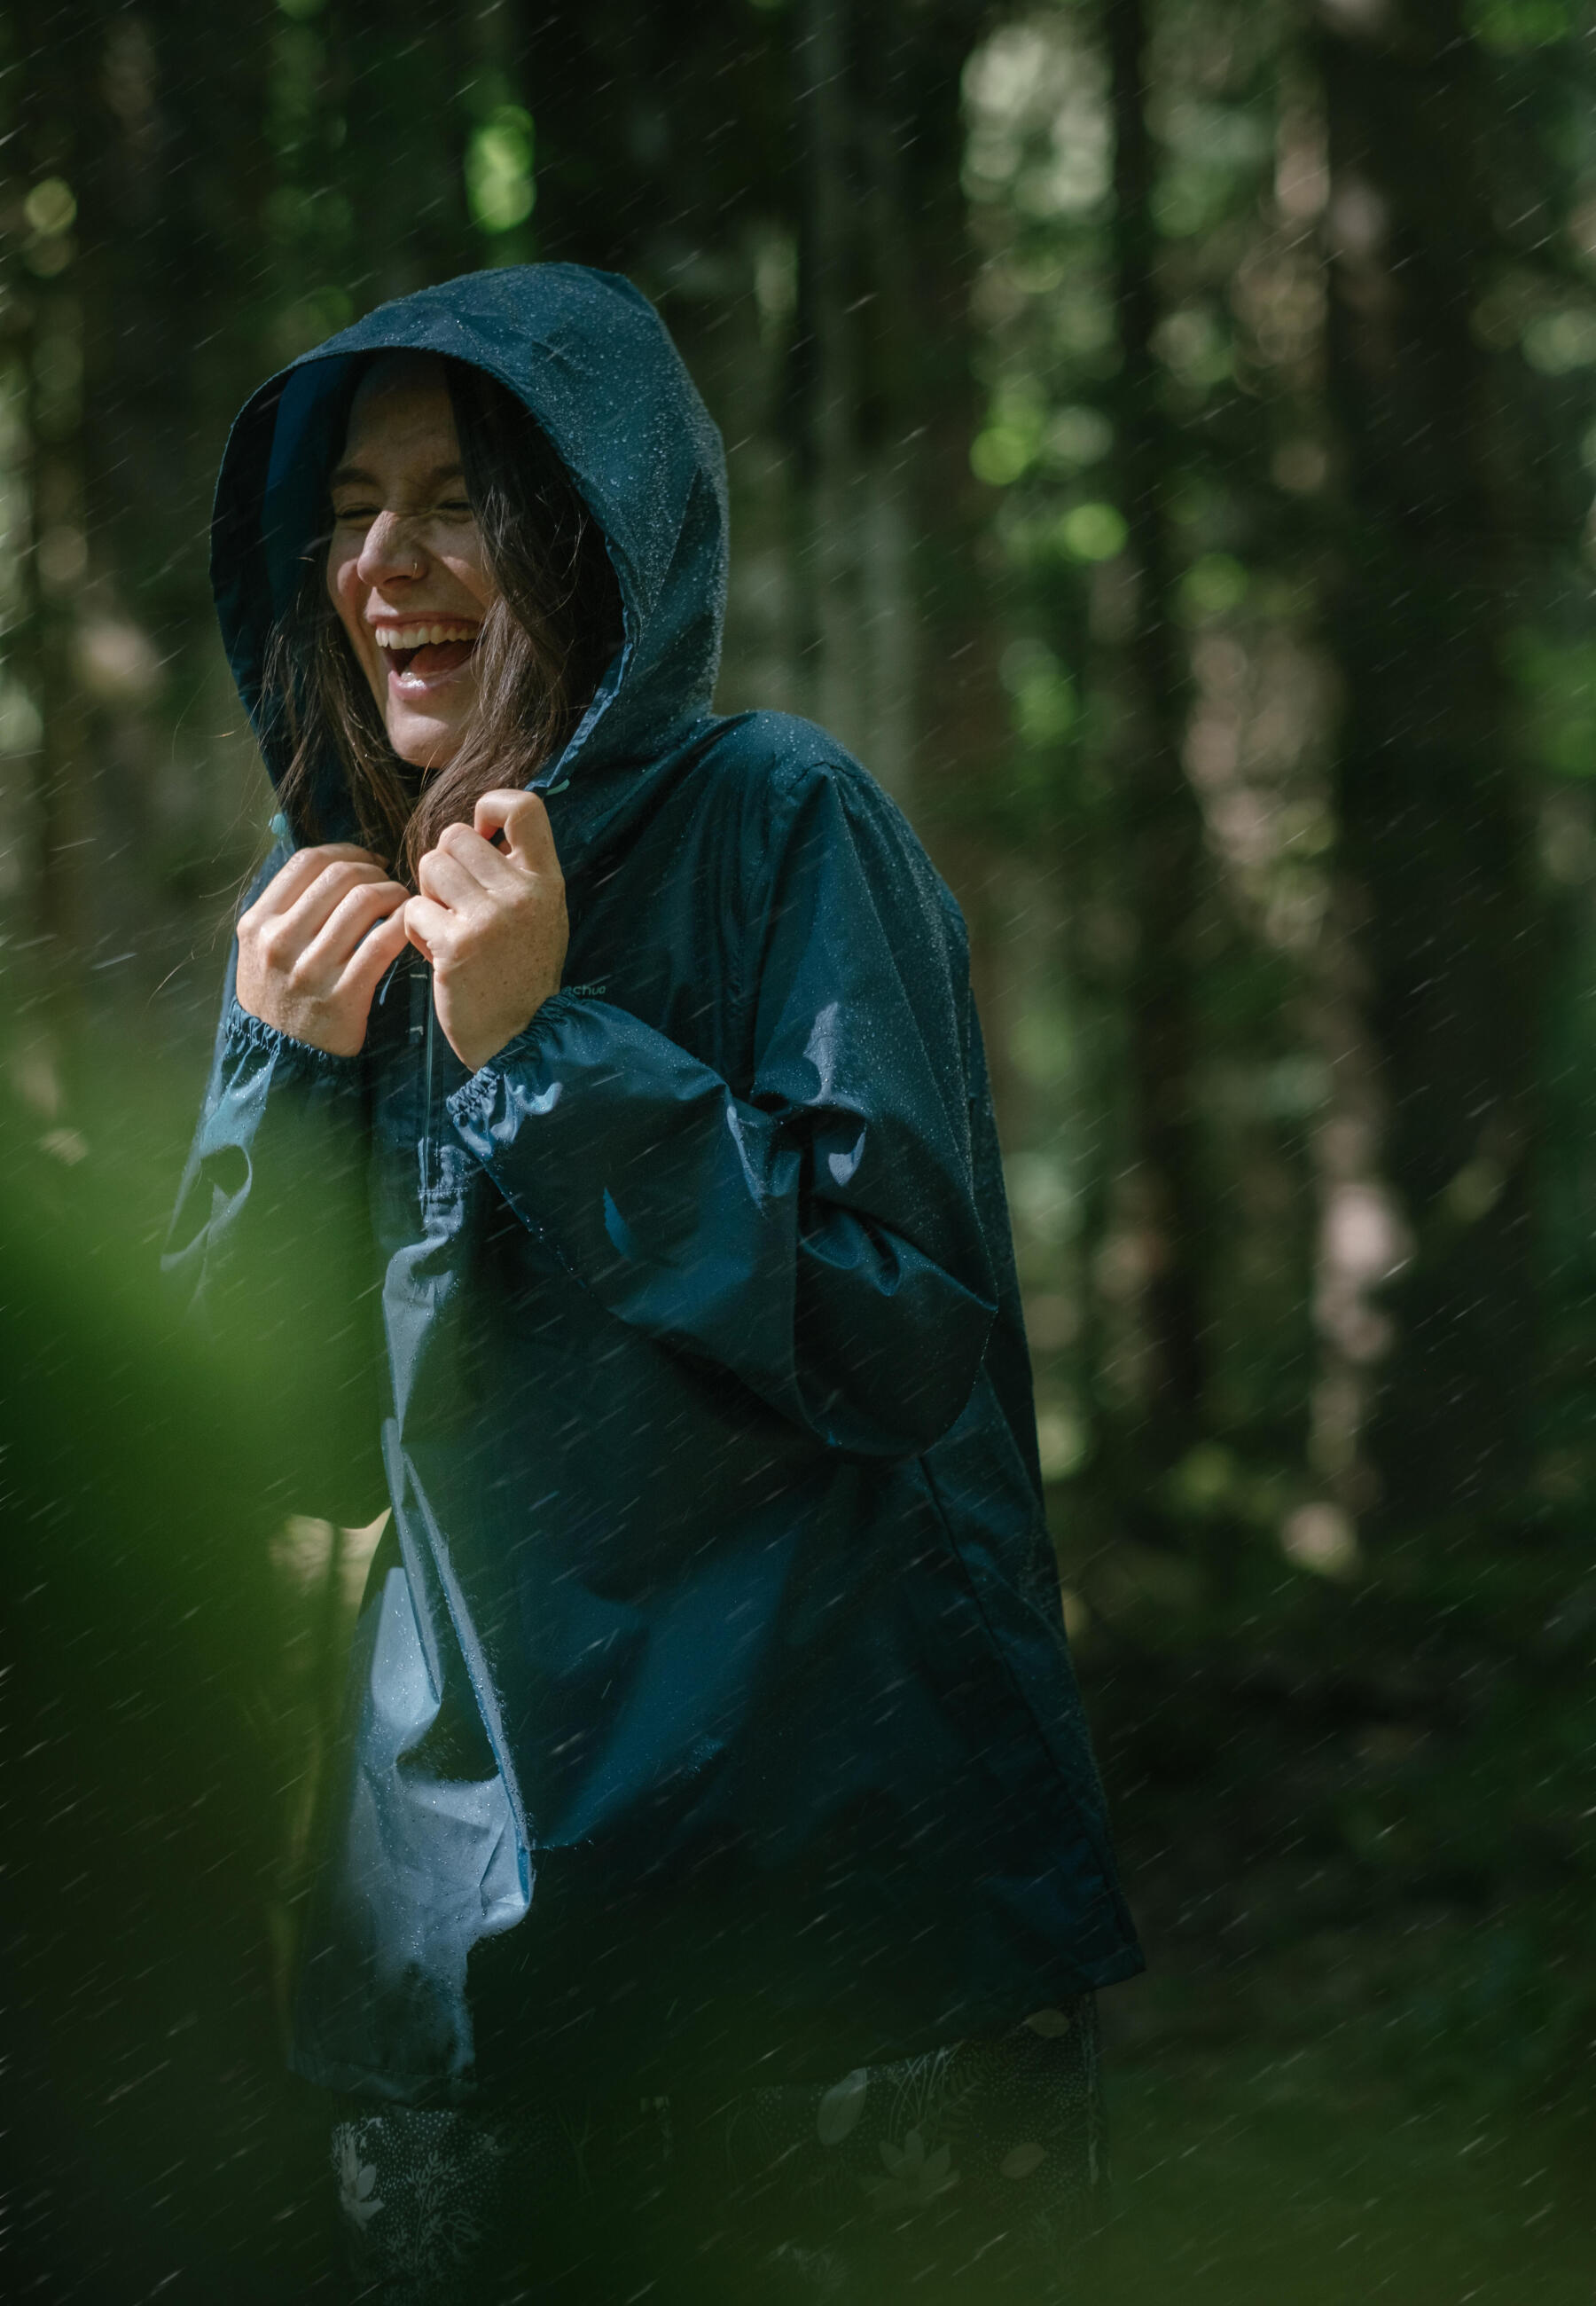 Camping in the rain: tips for getting kitted out and having fun